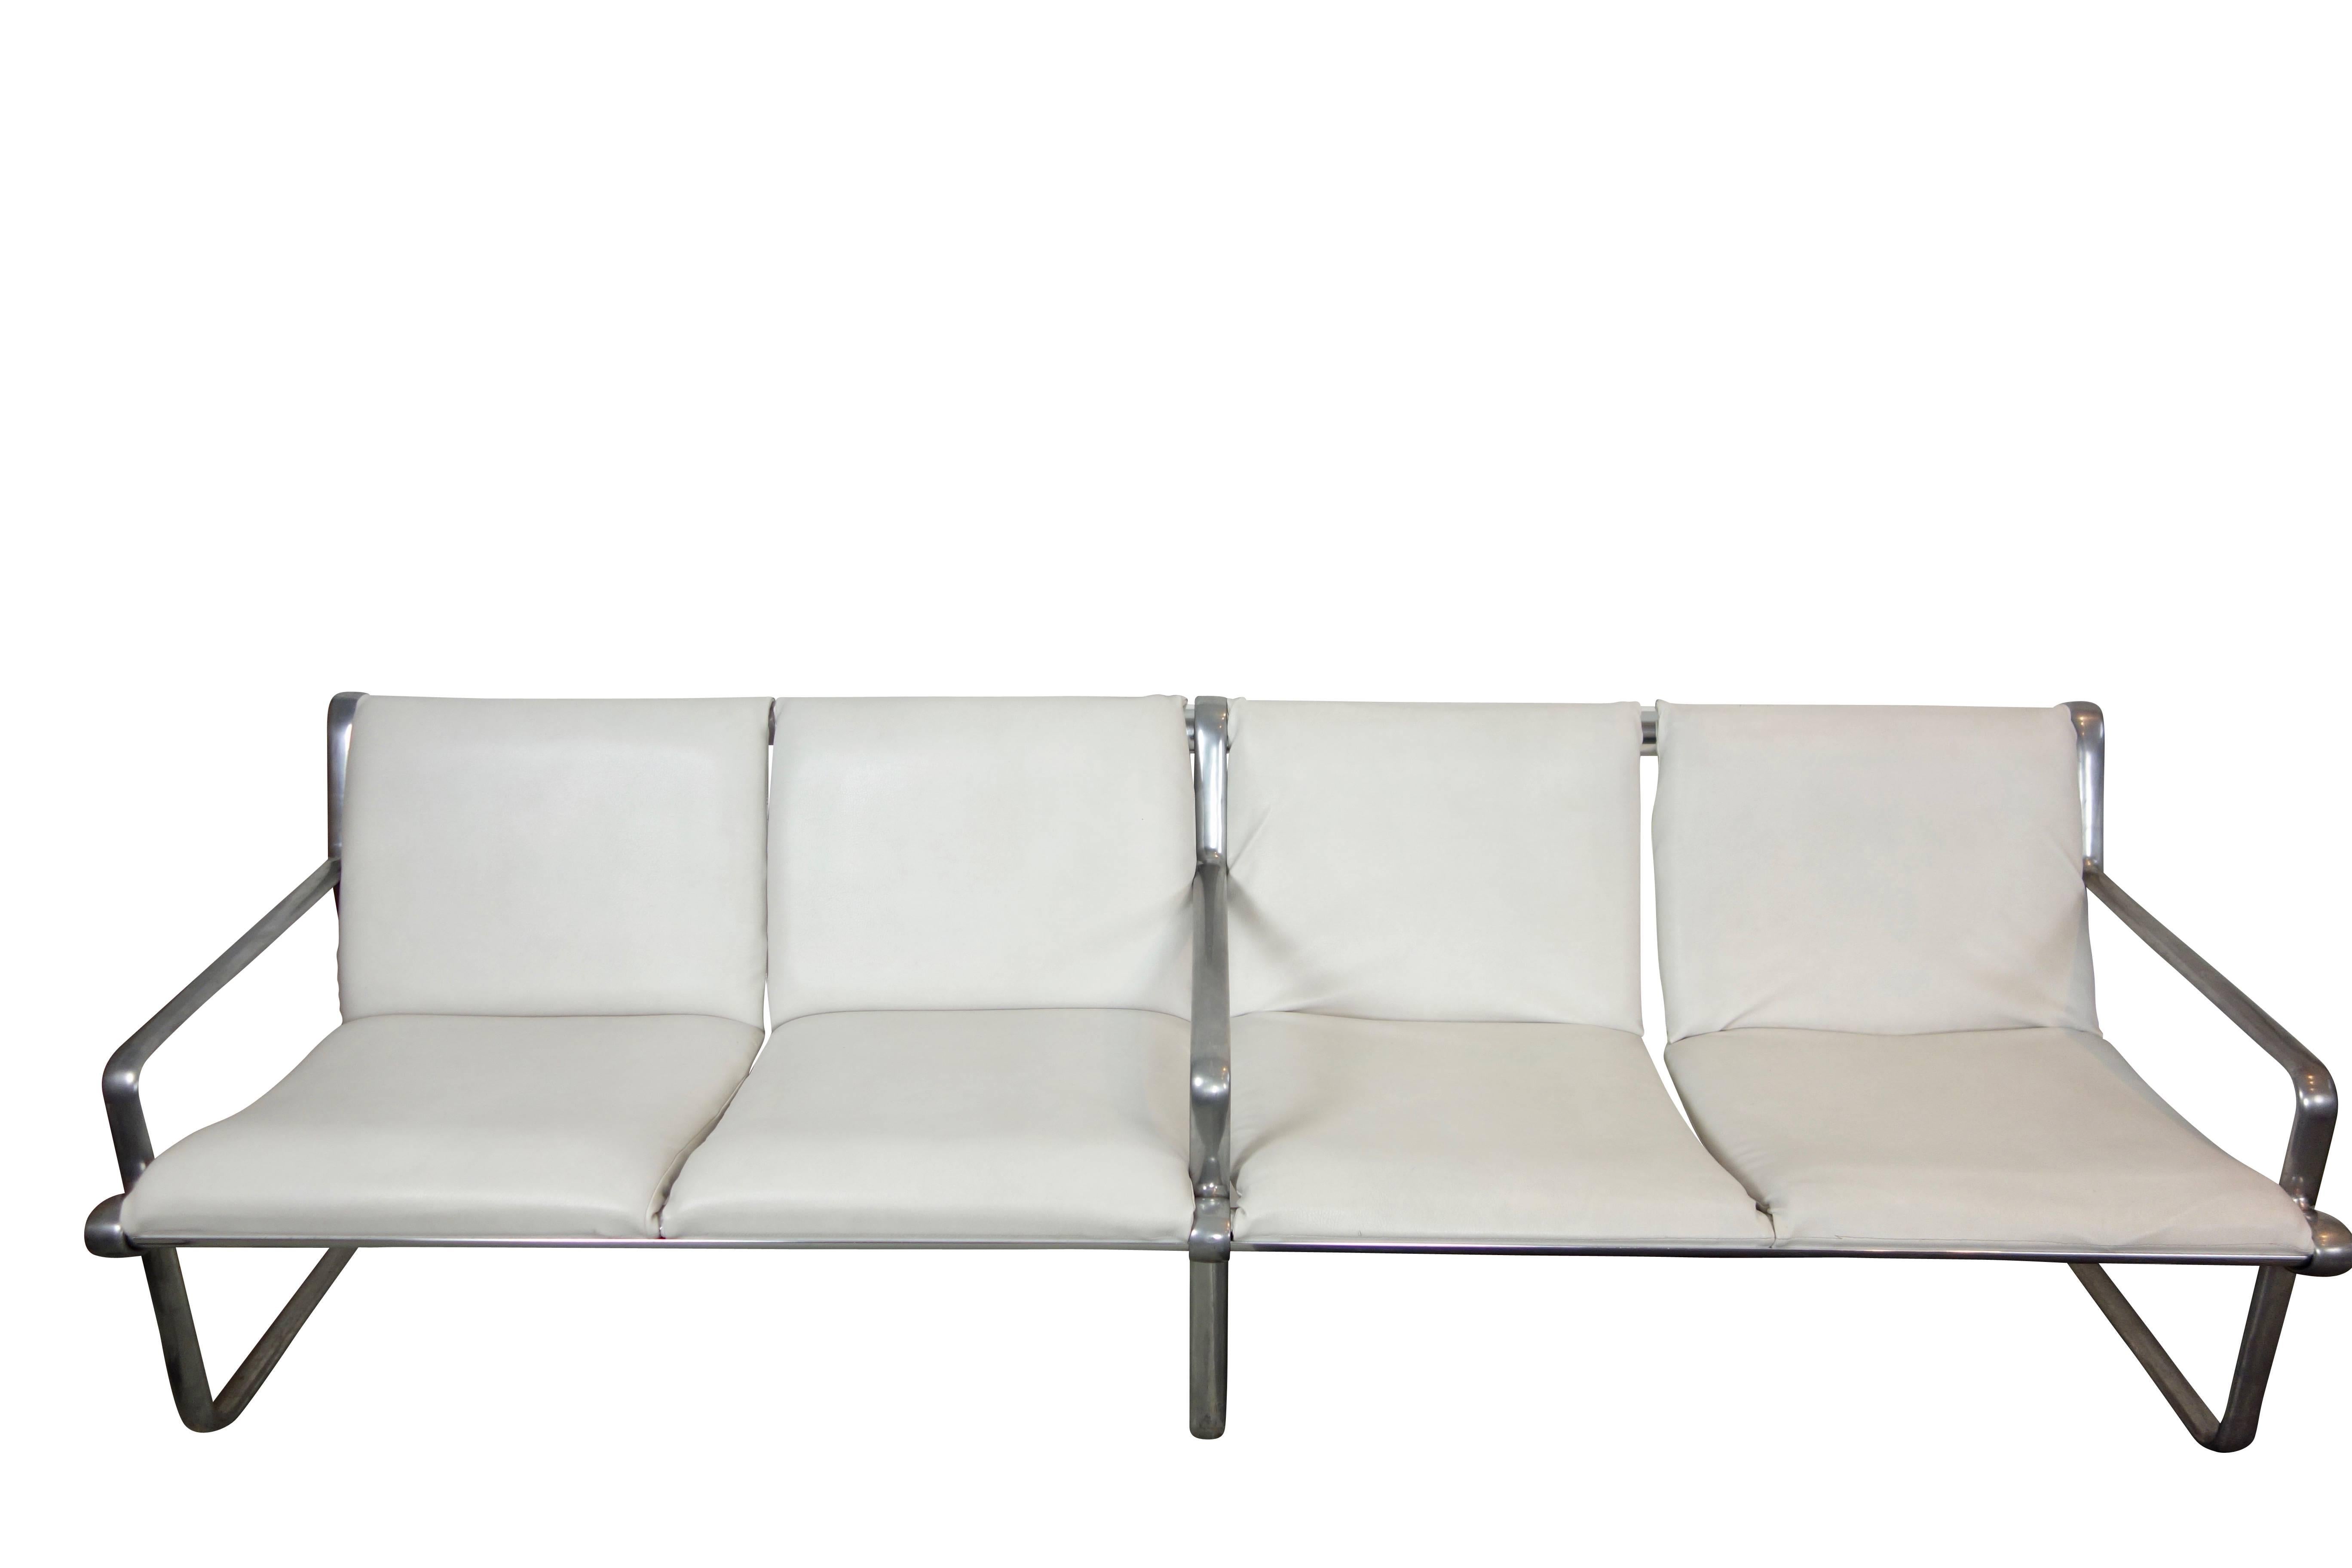 This is a four-seat Hannah and Morrison airport sling sofa produced by Knoll with aluminum frame and white leather upholstery.